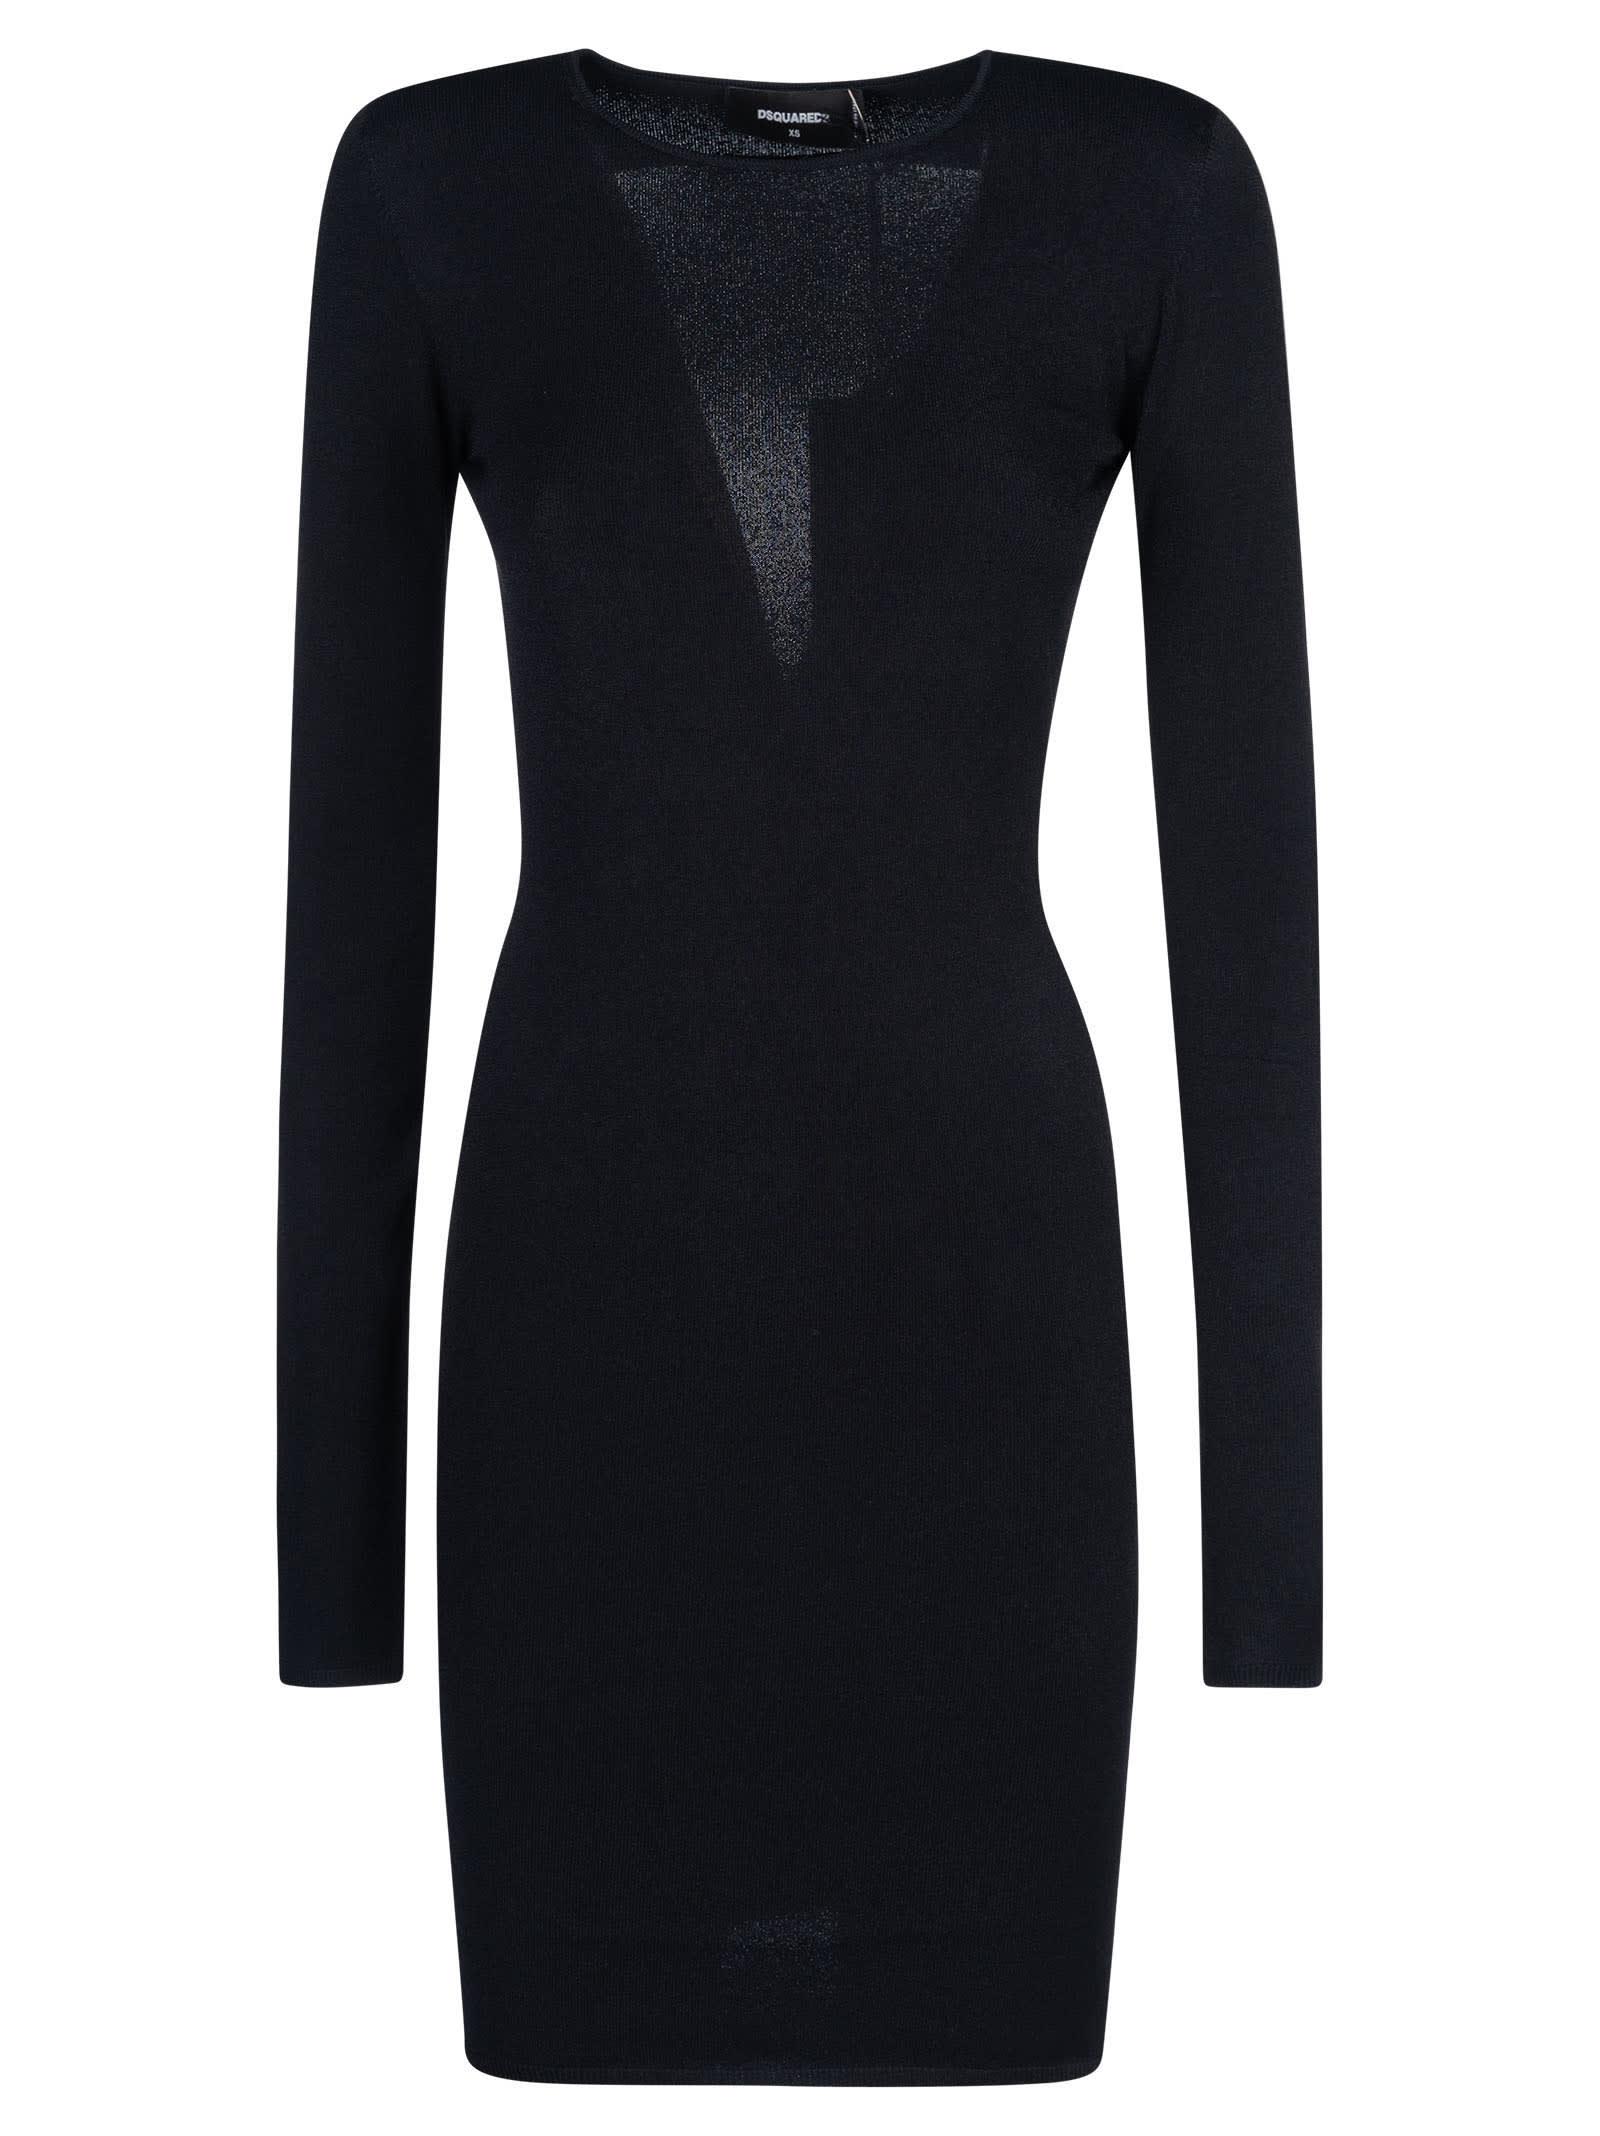 dsquared² cut out knit dress in black lyst